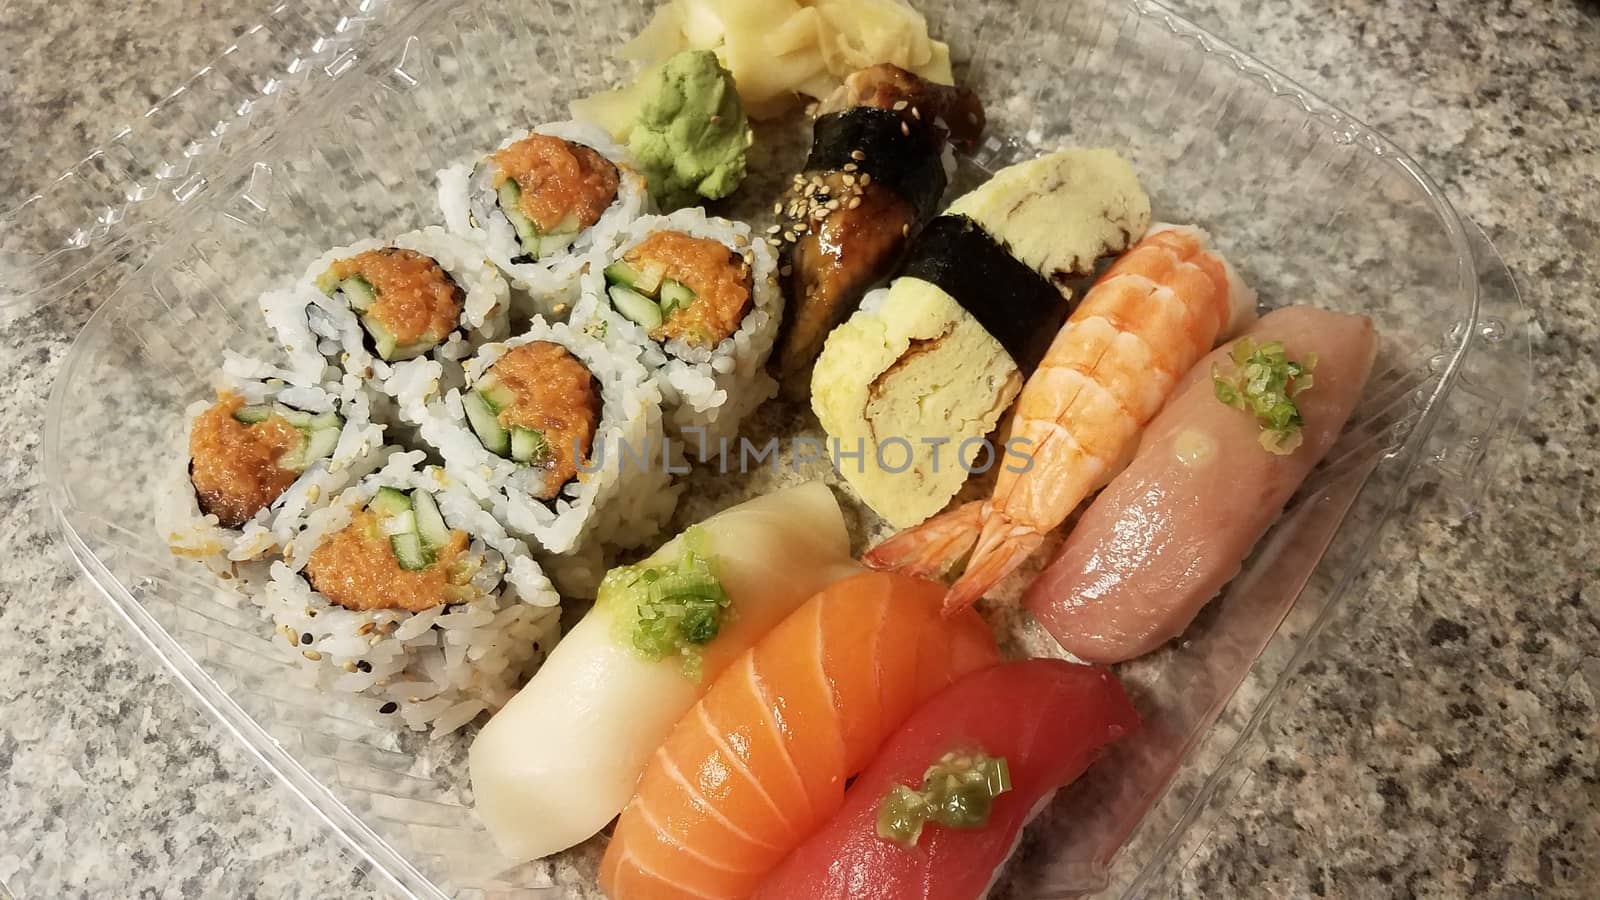 salmon and tuna and rice sushi in plastic container by stockphotofan1